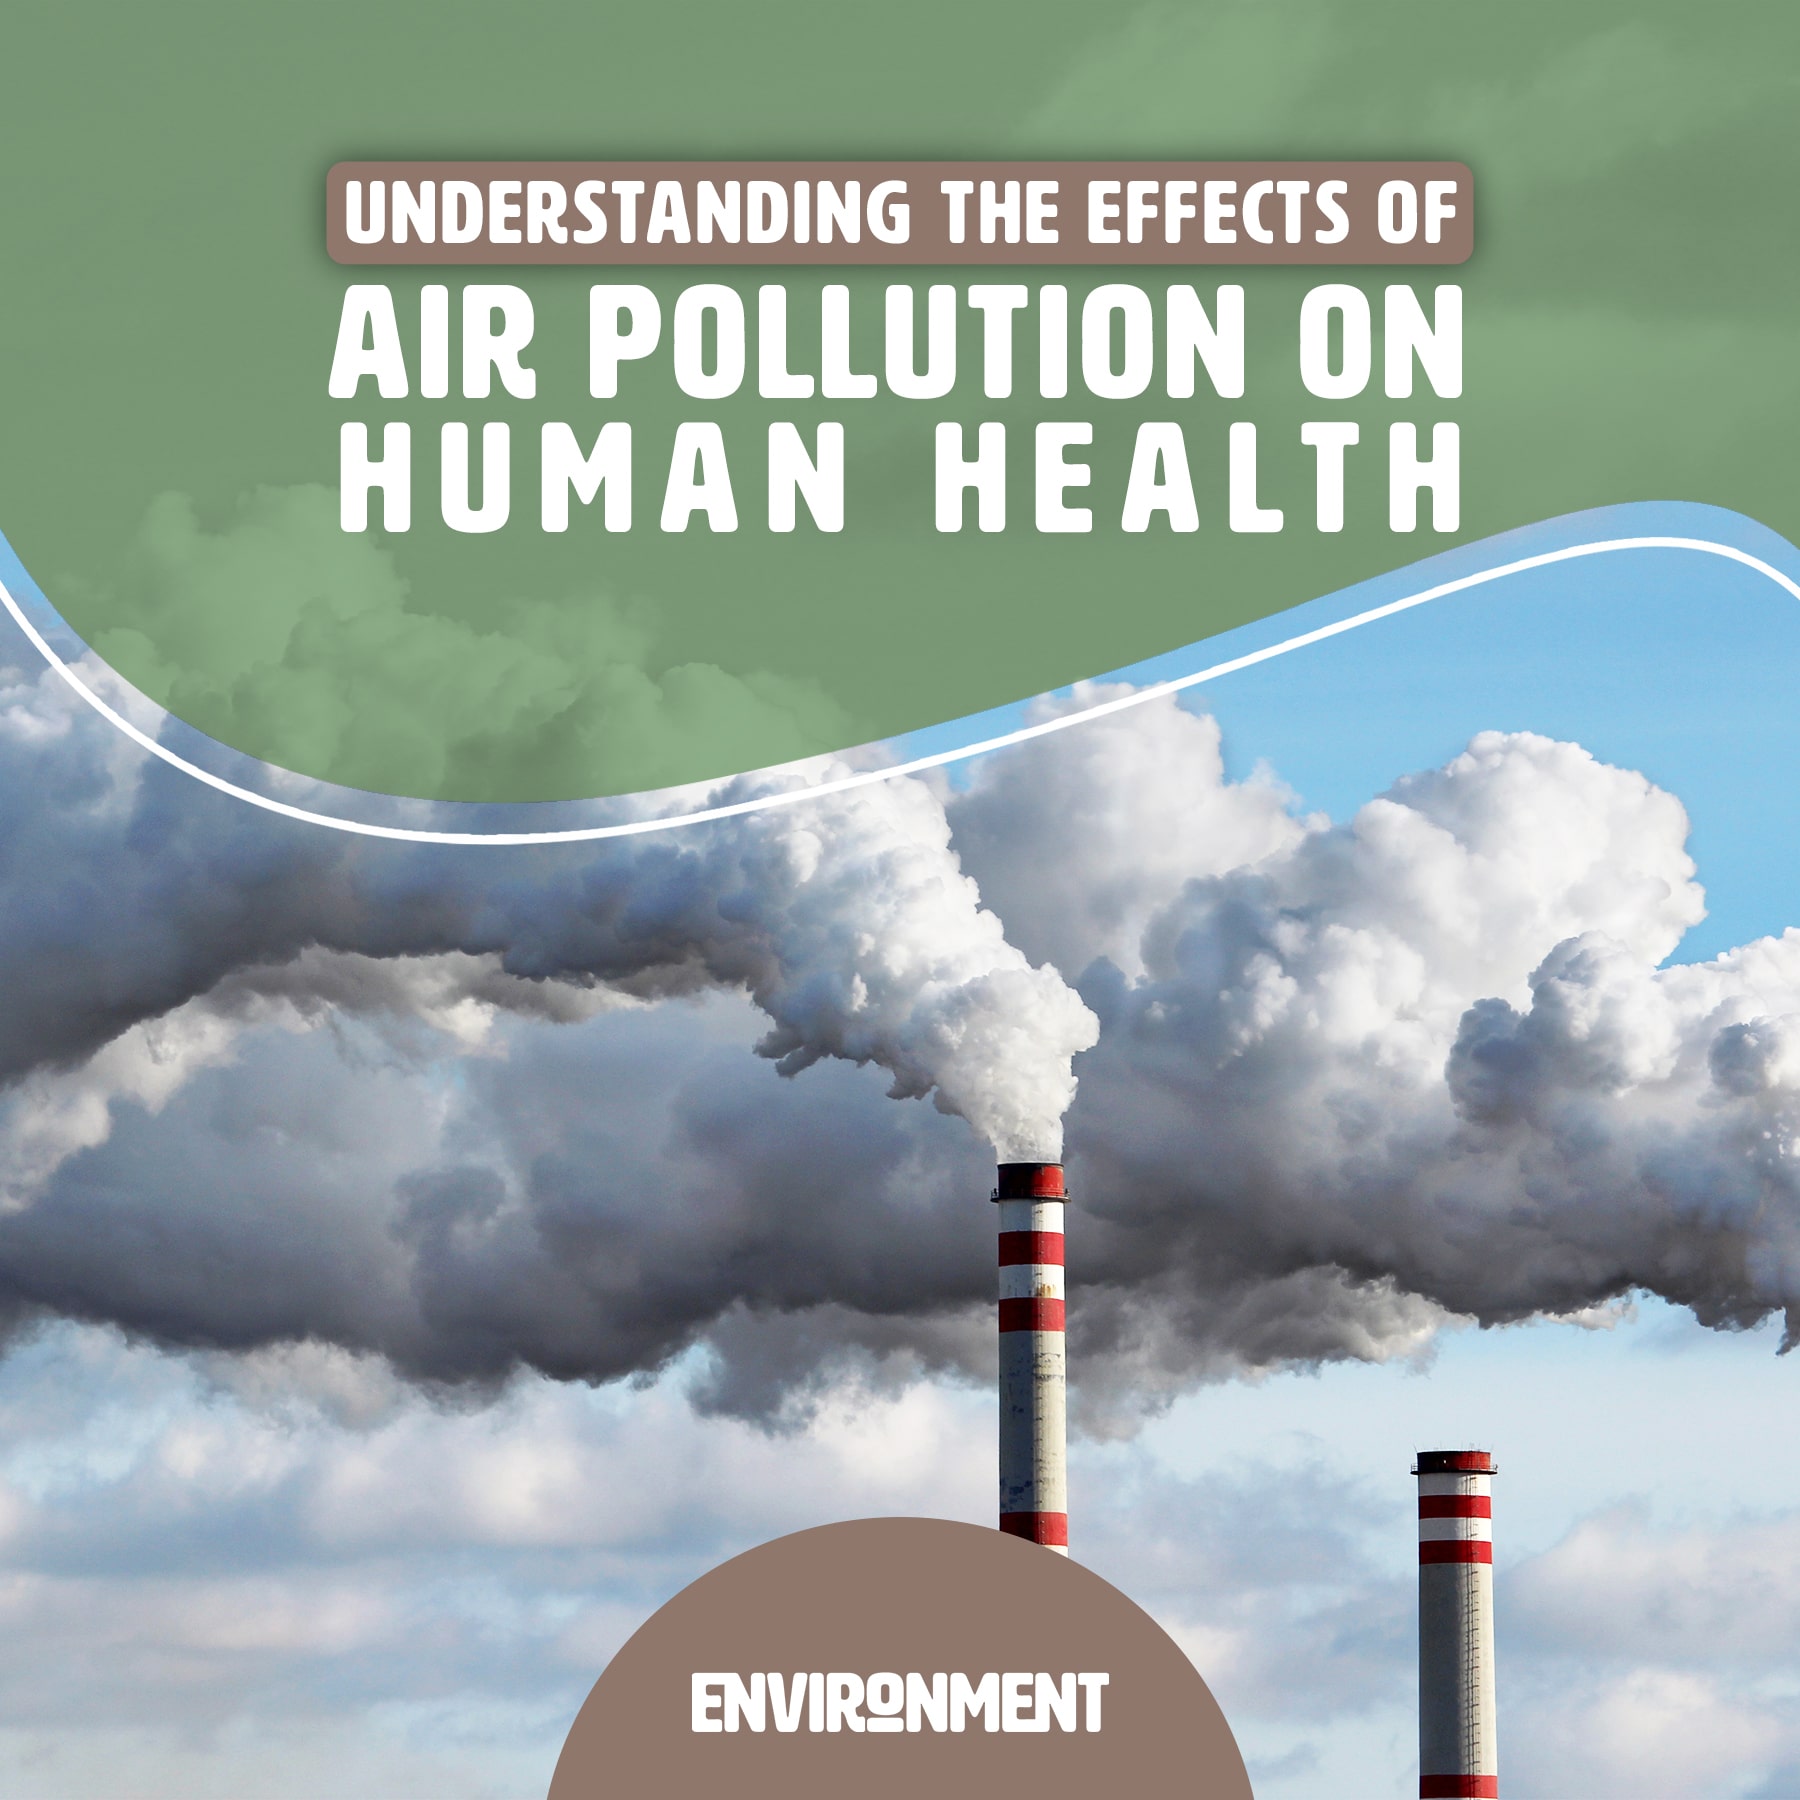 effects of pollution on human health essay brainly